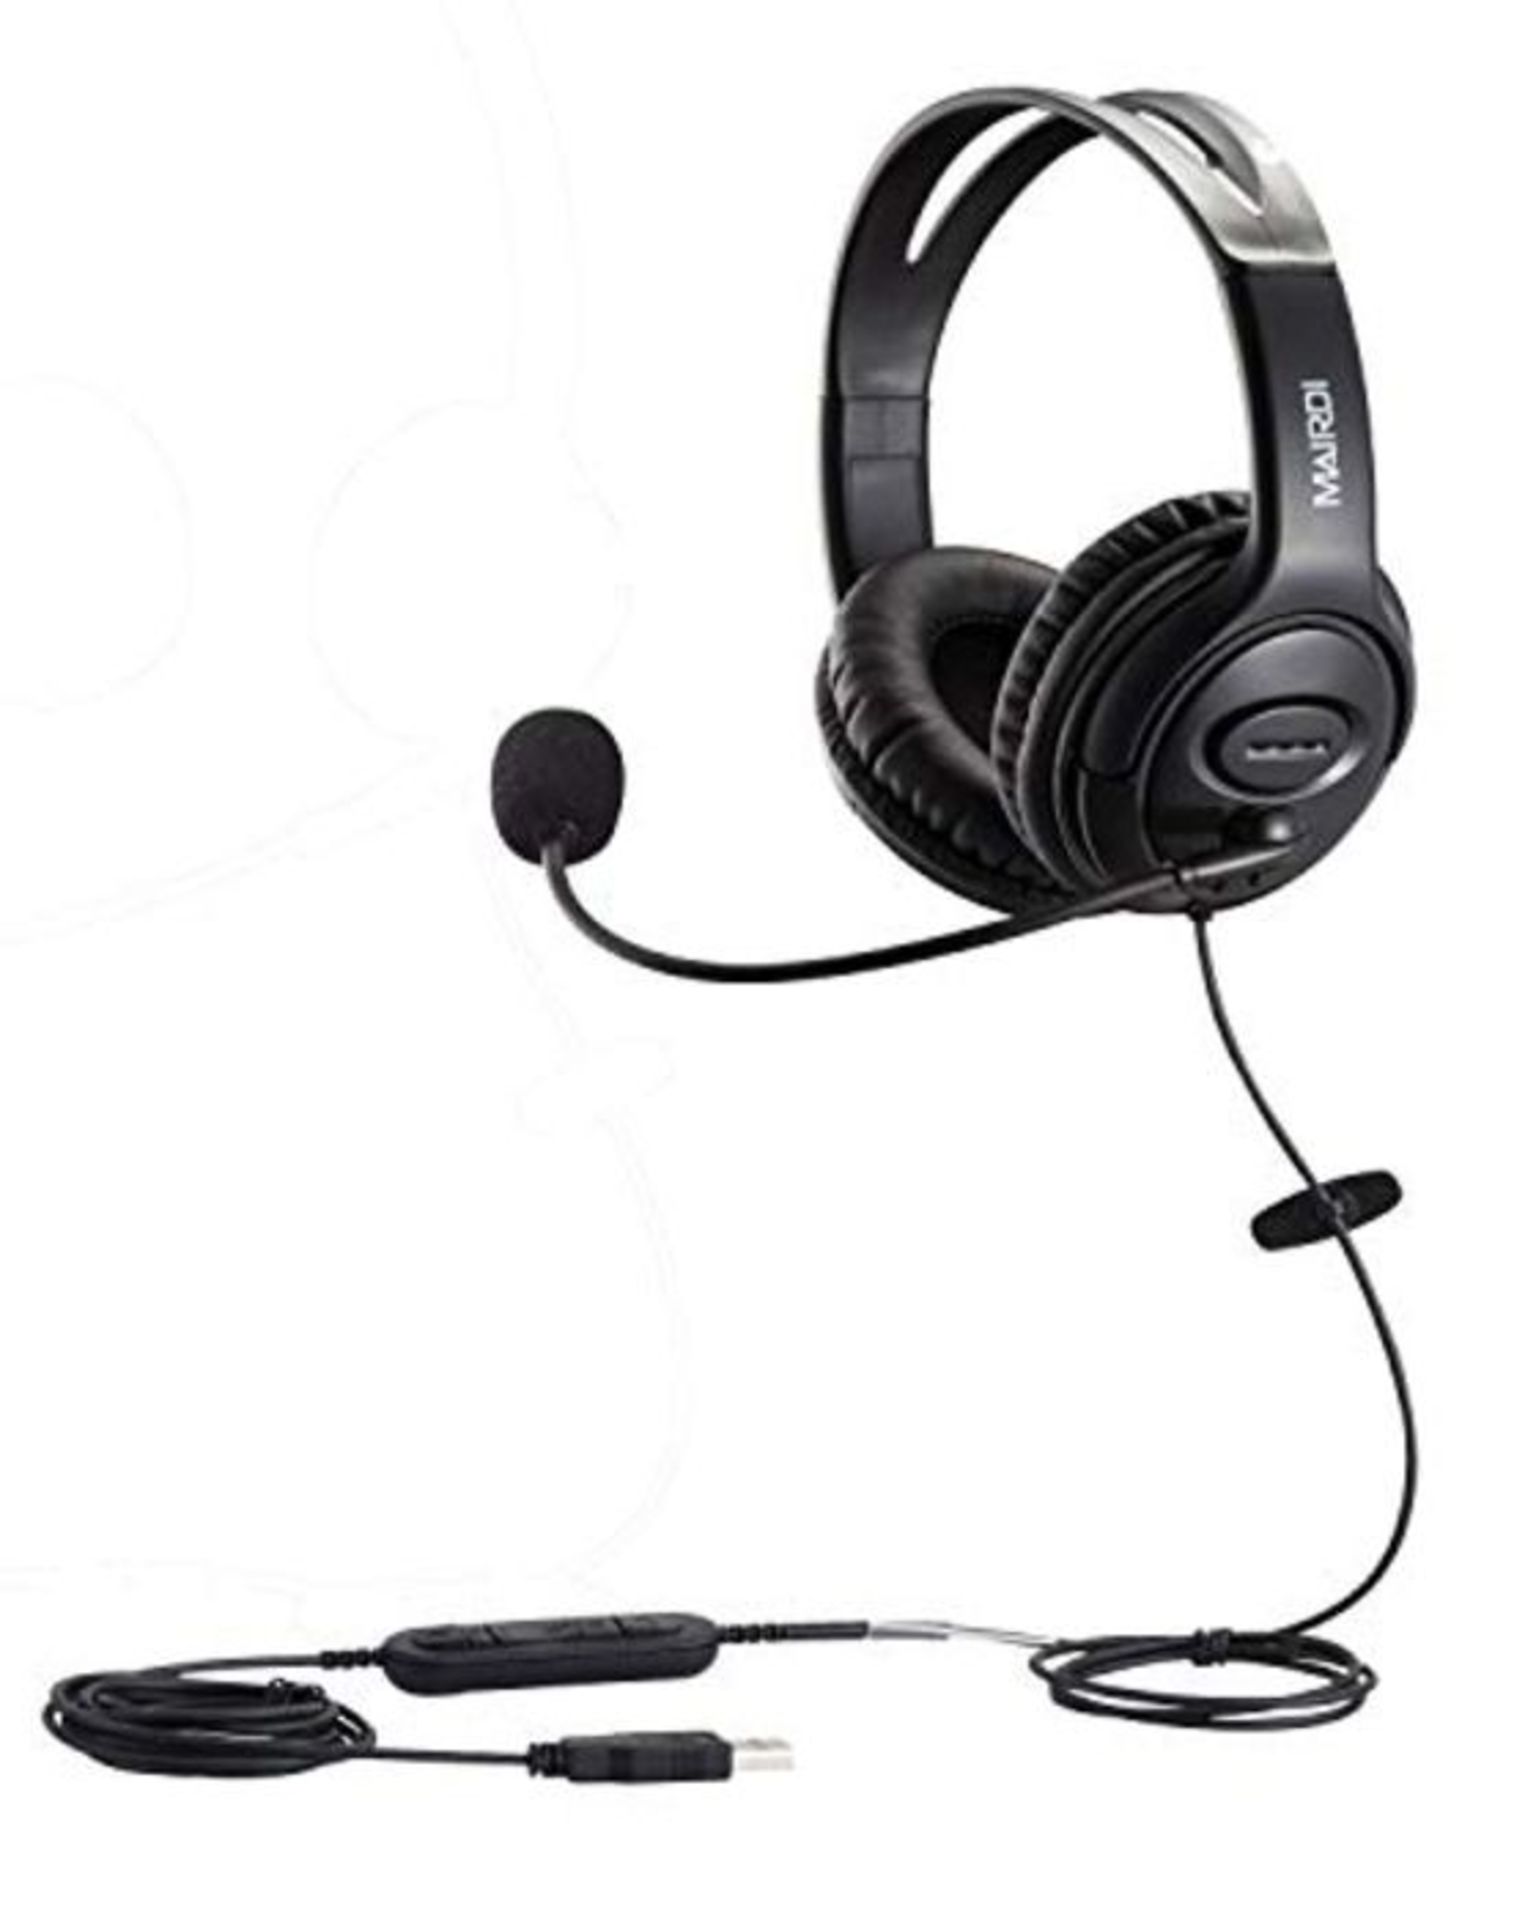 USB Headset with Noise Cancelling Microphone for Office Call Center Skype Teams Busine